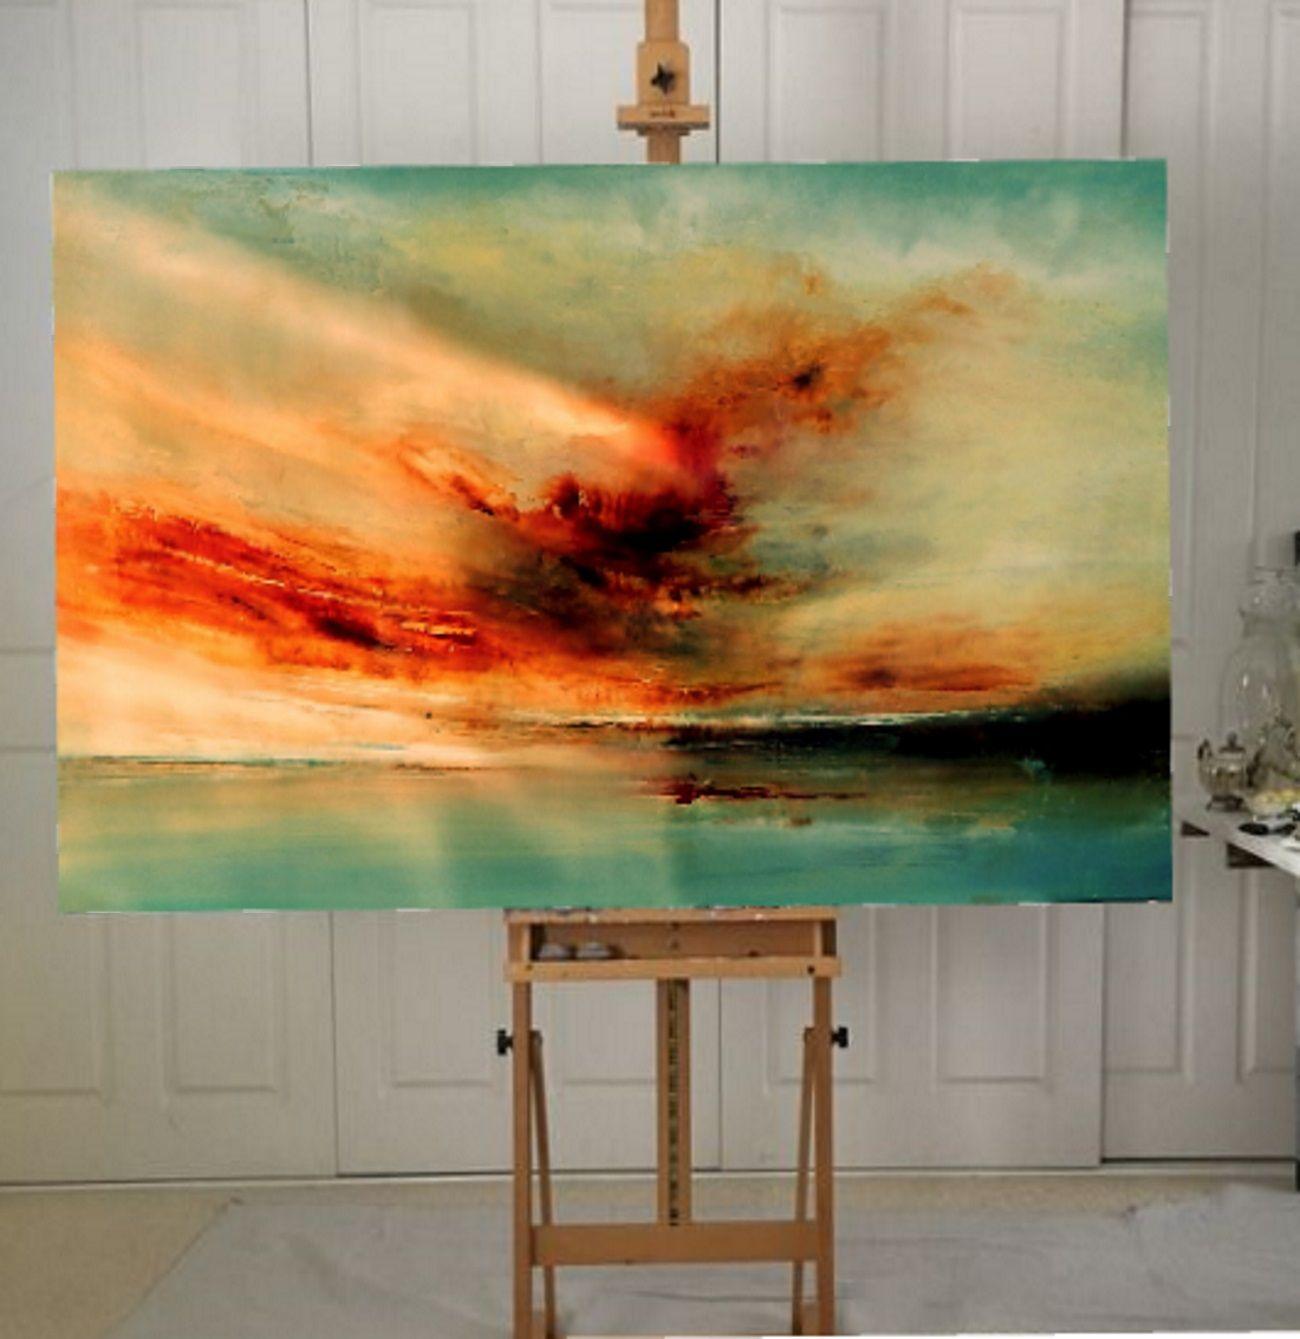 When the Clouds paint the Sky, Painting, Oil on Canvas - Brown Abstract Painting by Olena Topliss